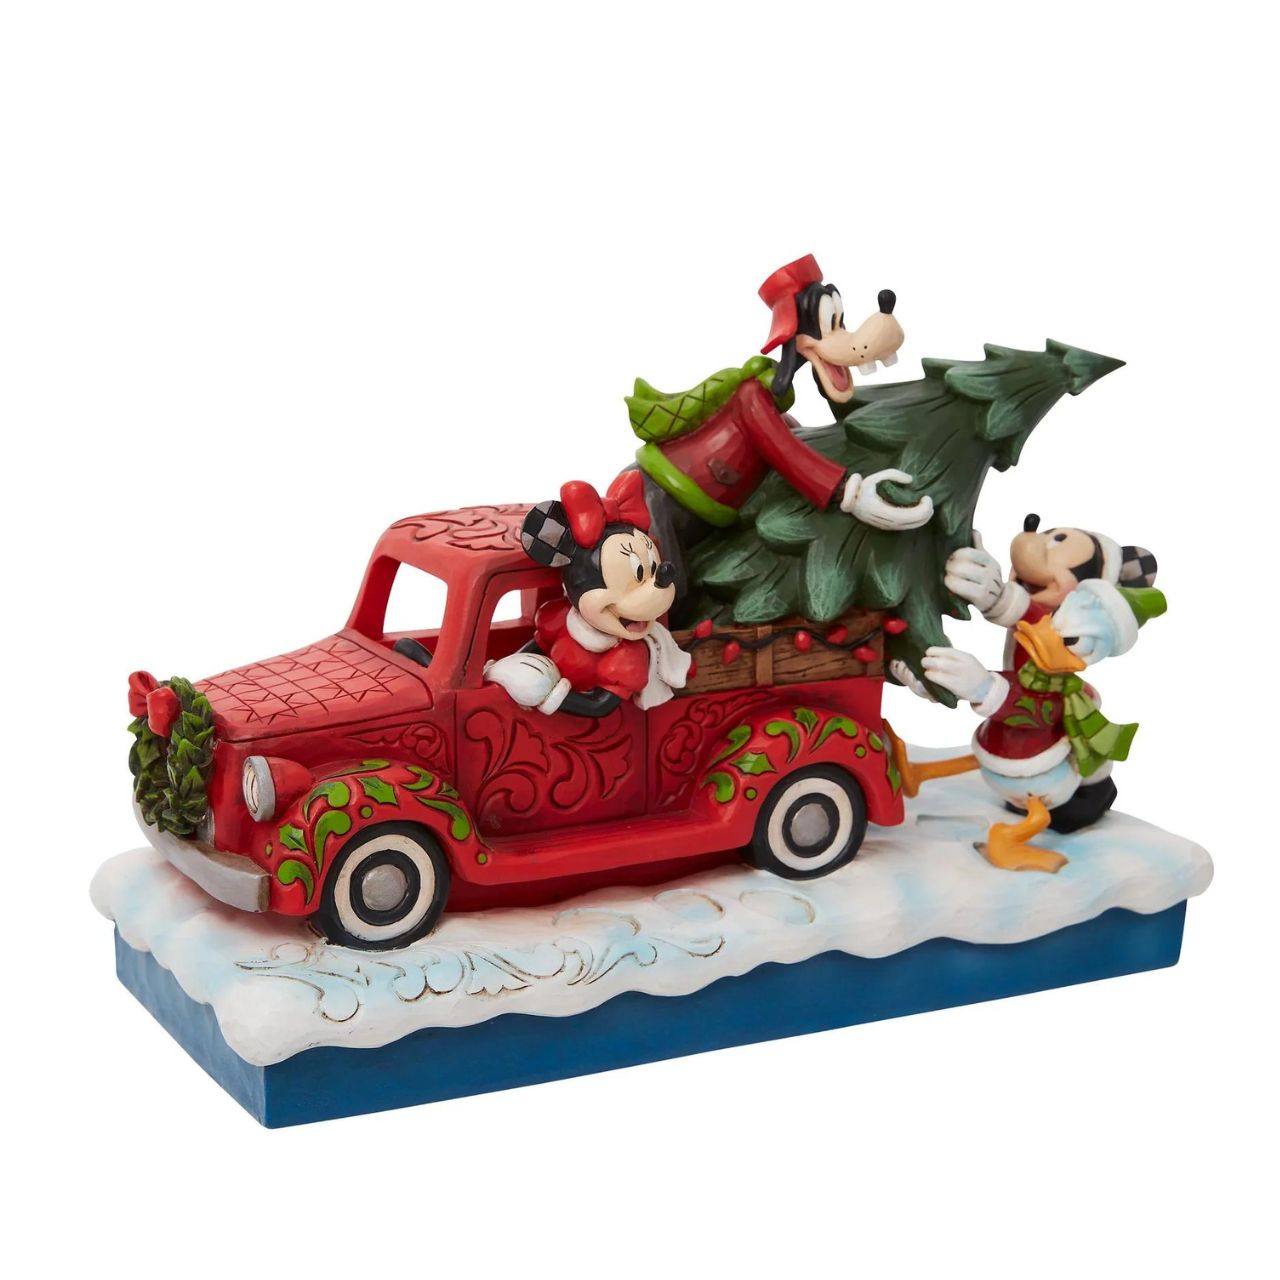 Disney Mickey Mouse and Friends with Red Truck Figurine  Loading a red pick up truck with a freshly picked Christmas tree, Minnie and Mickey Mouse pair up with Donald Duck and Goofy for a wonderful winter spent with friends in this Jim Shore design. The figurine is made from cast stone.